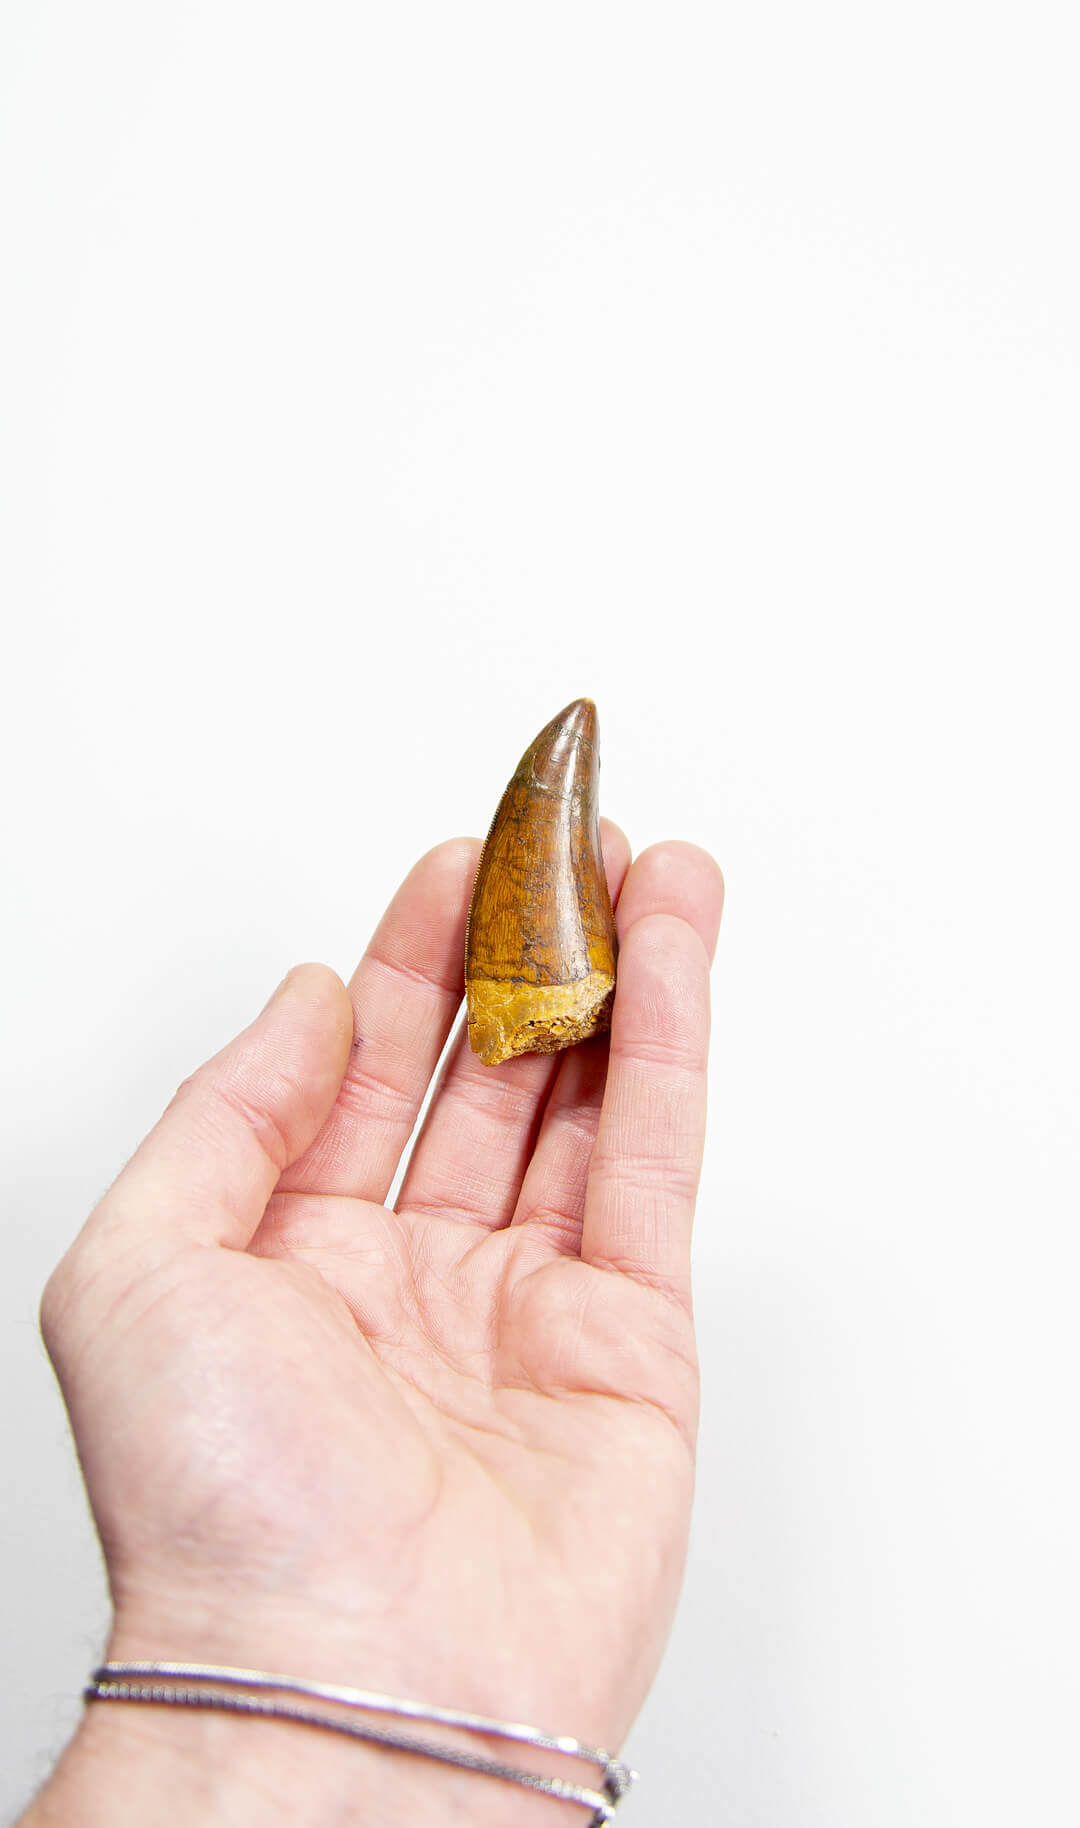 real fossil dinosaur carcharodontosaurus tooth for sale at the uk fossil store 25